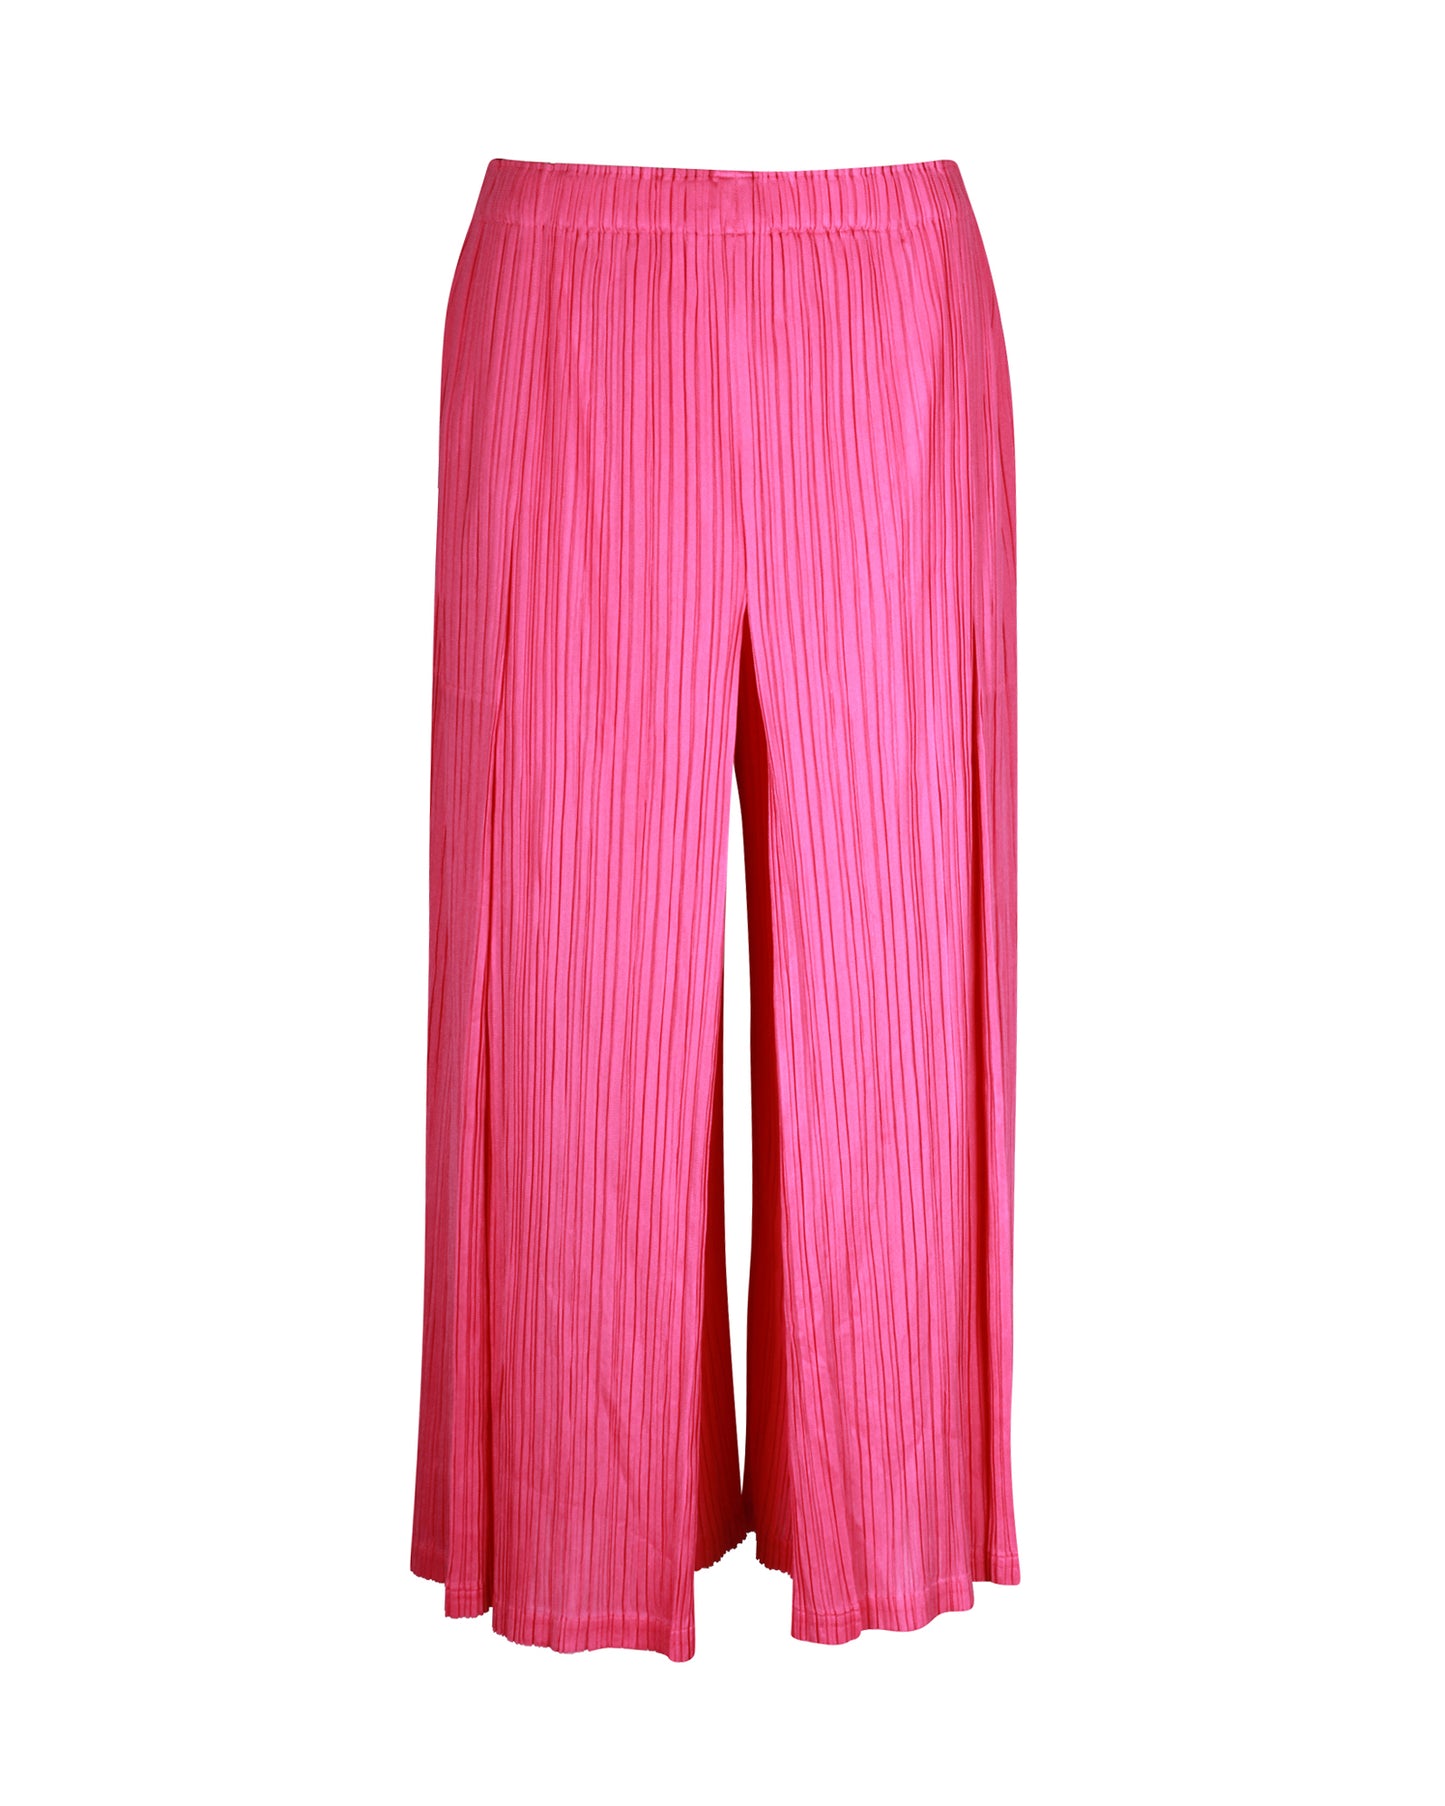 IKKO TANAKA Candy Pink Pleated Loose Fit Pants